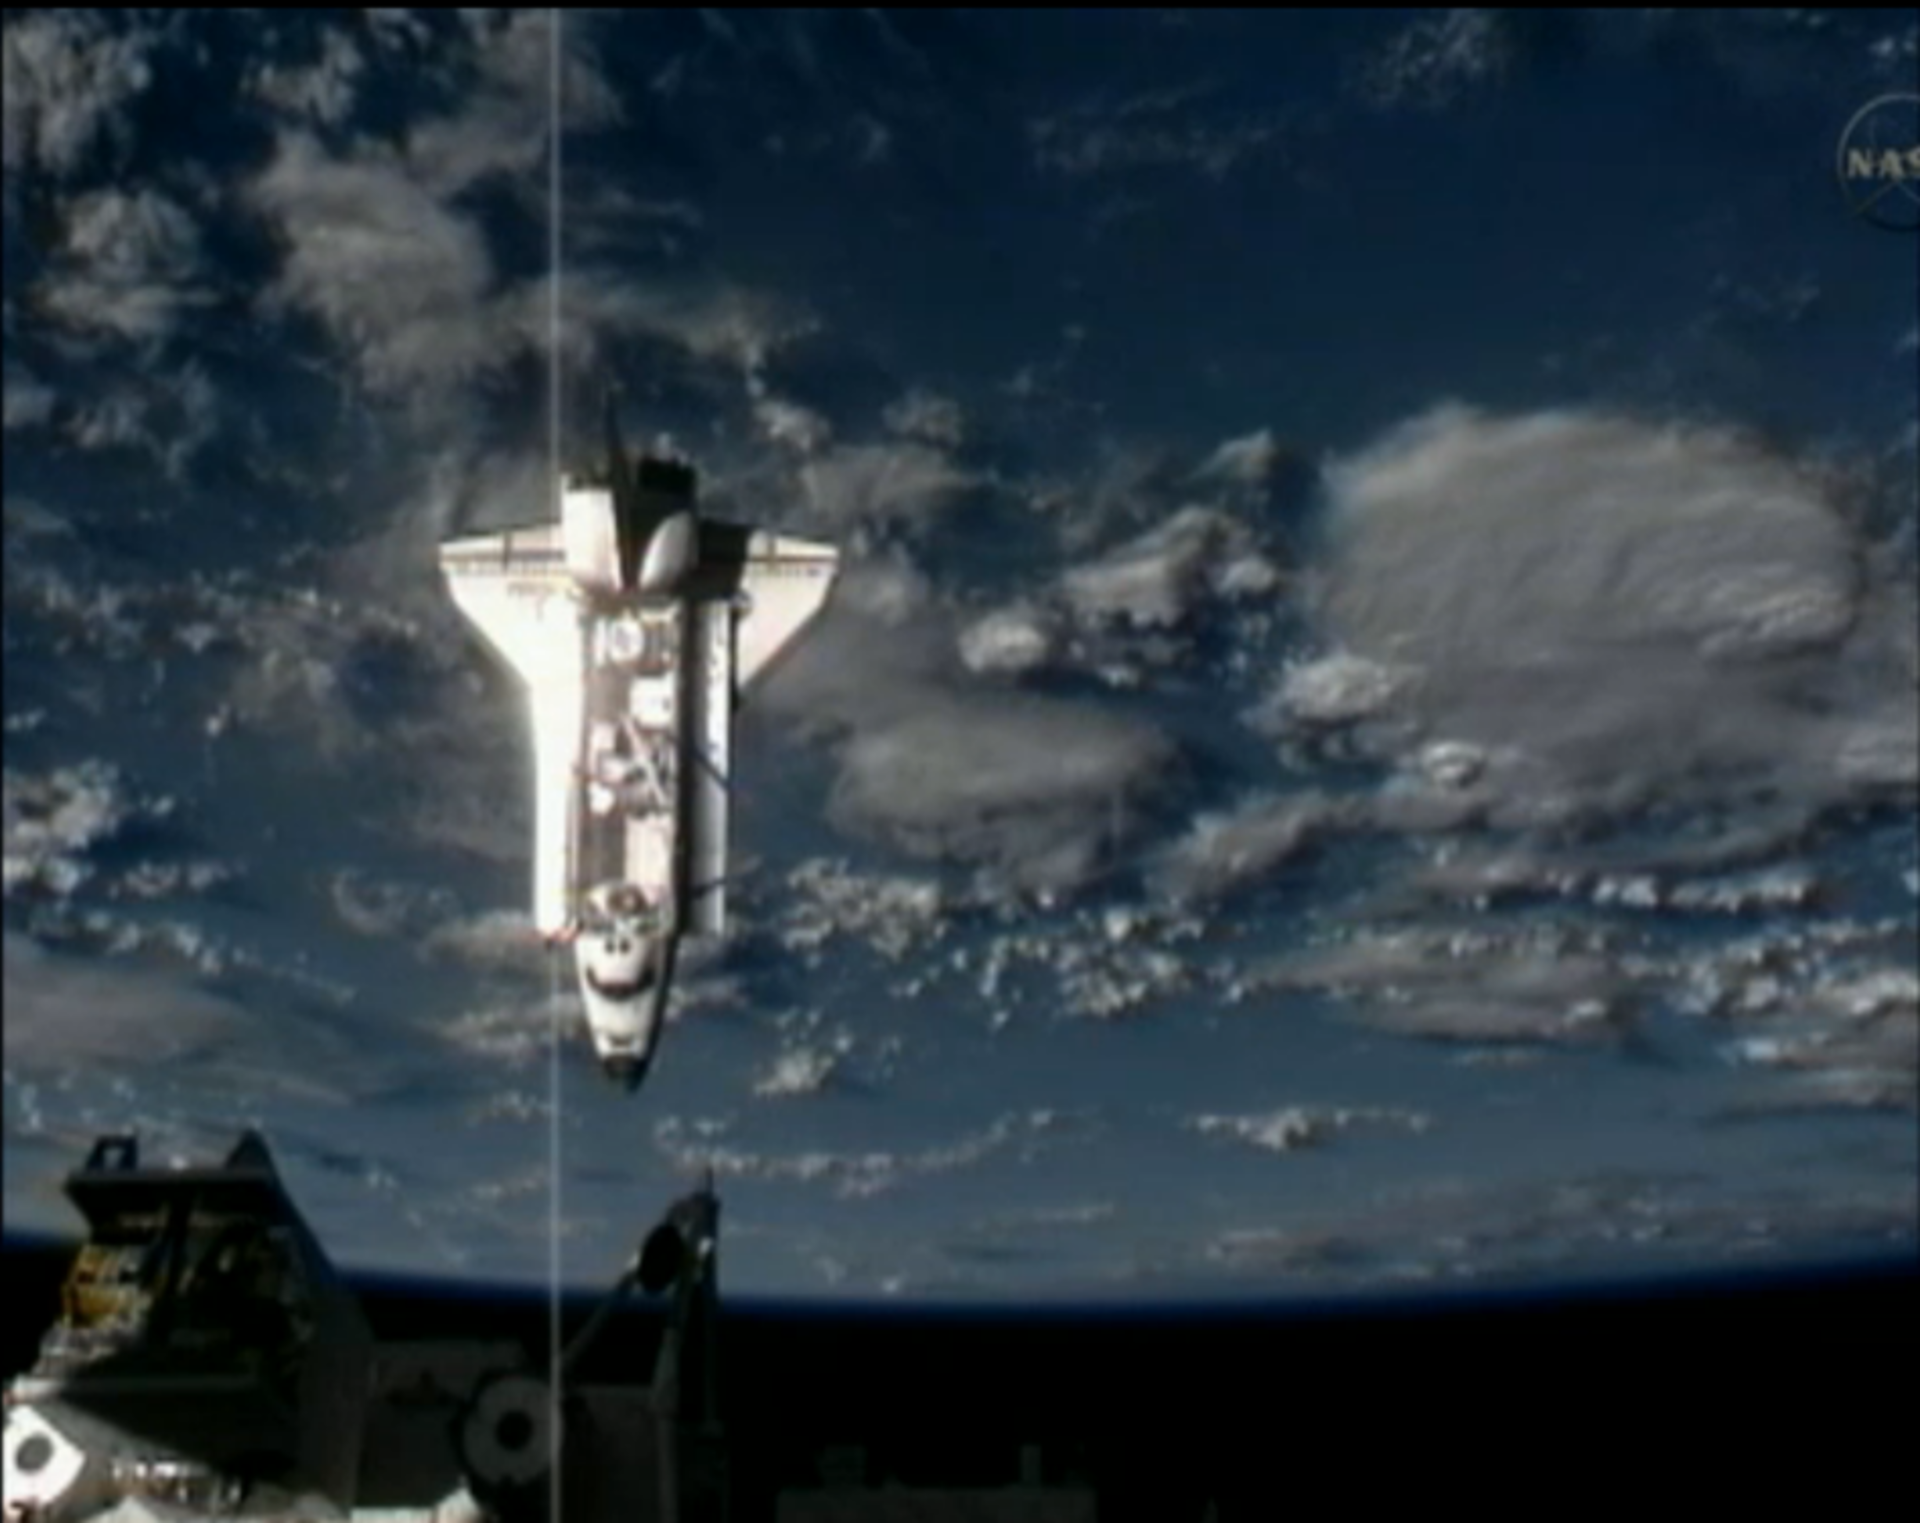 Endeavour approaching ISS